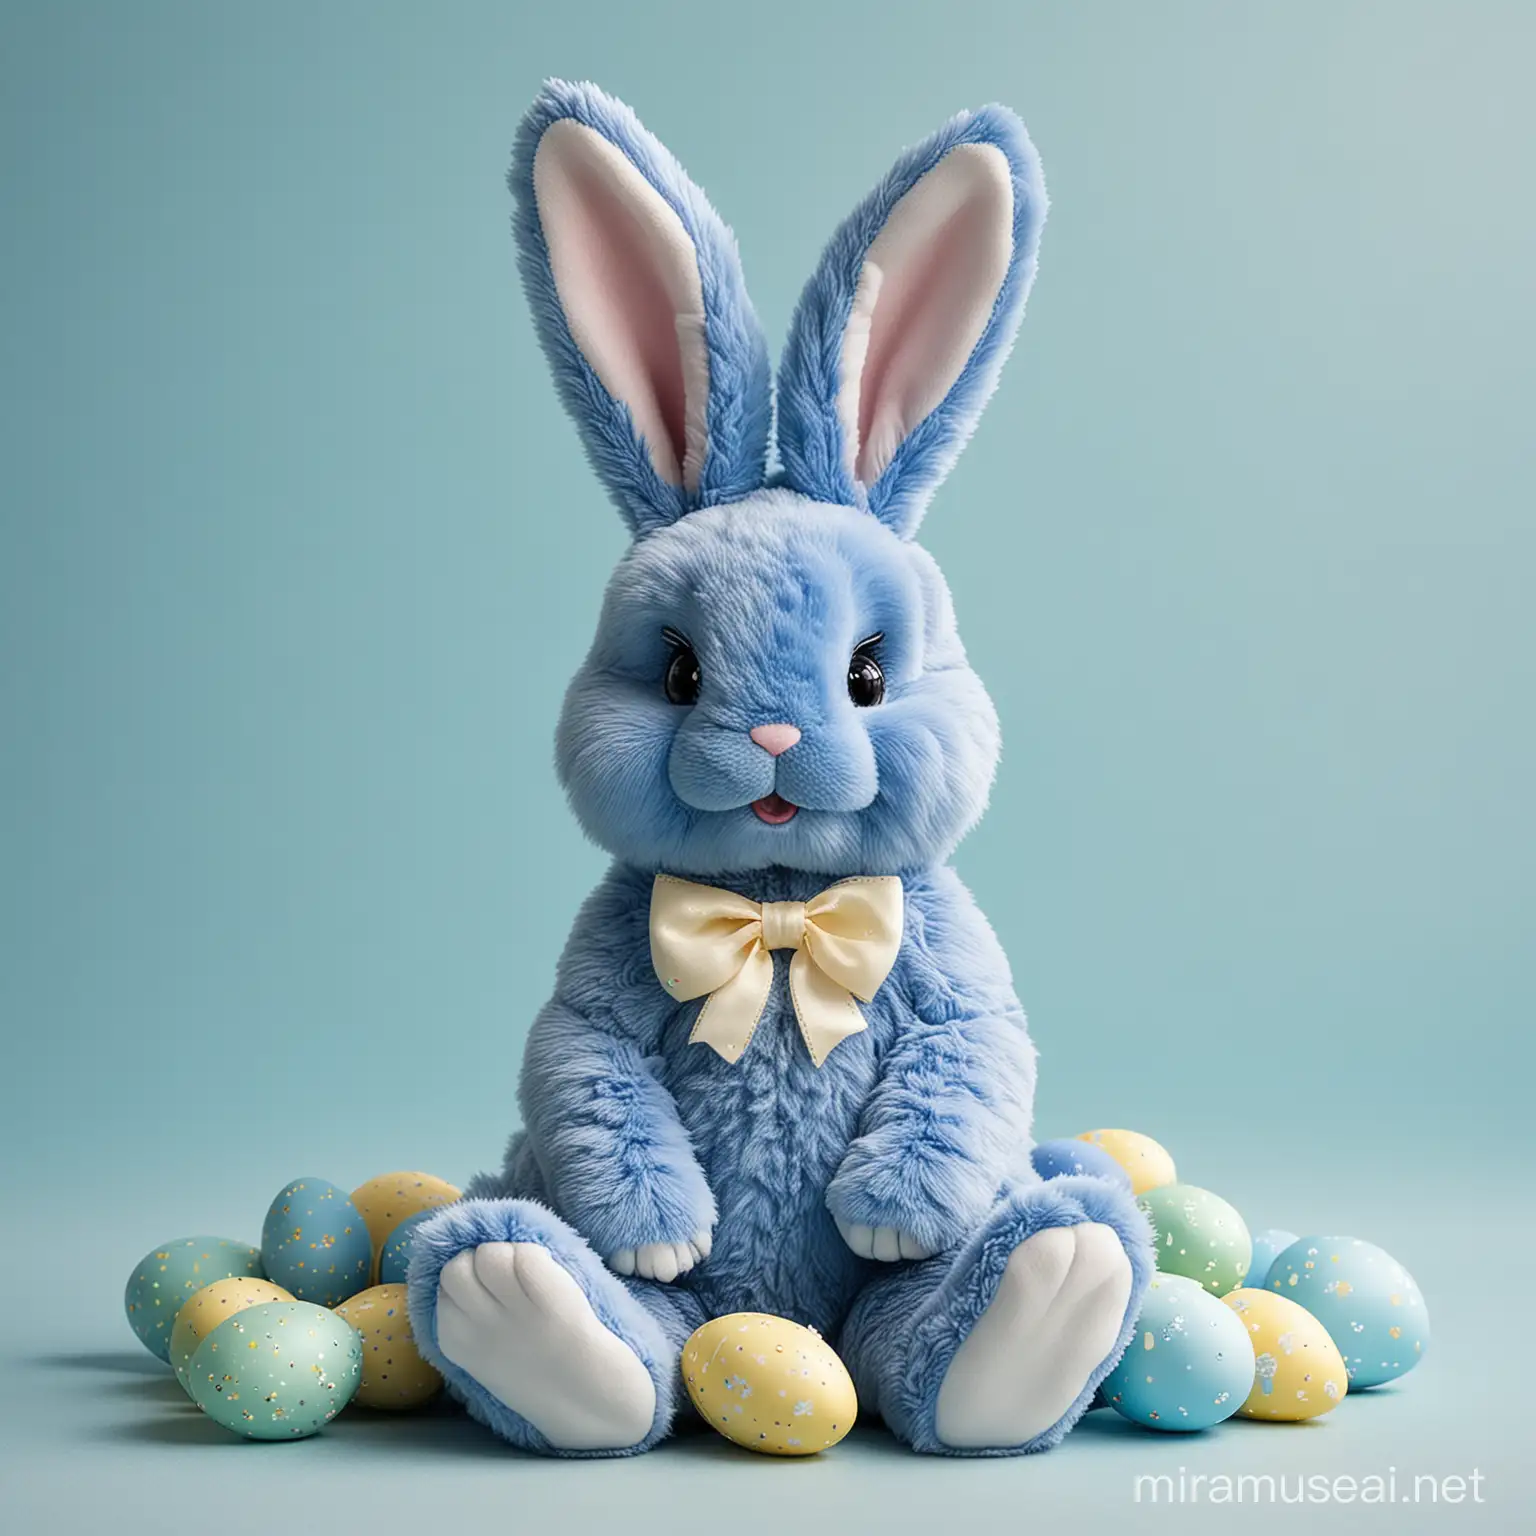 A happy blue bunny that is easter themed